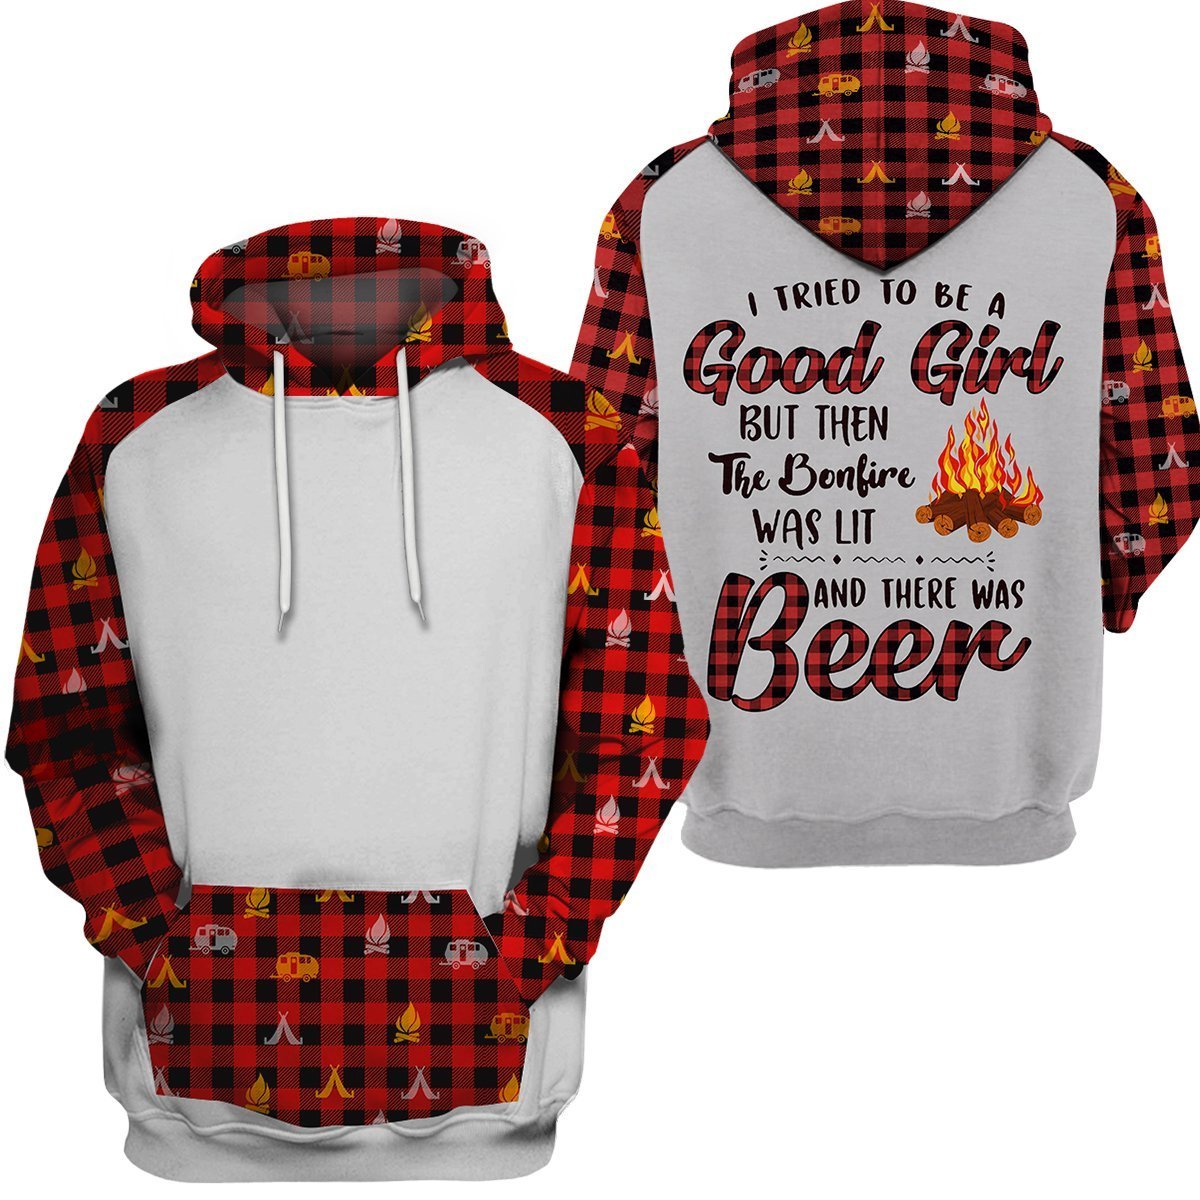  Beer Camping T-shirt I Tried To Be Good Girl But Then The Bonfire Was Lit And There Was Beer Red White Hoodie Adult Full Print